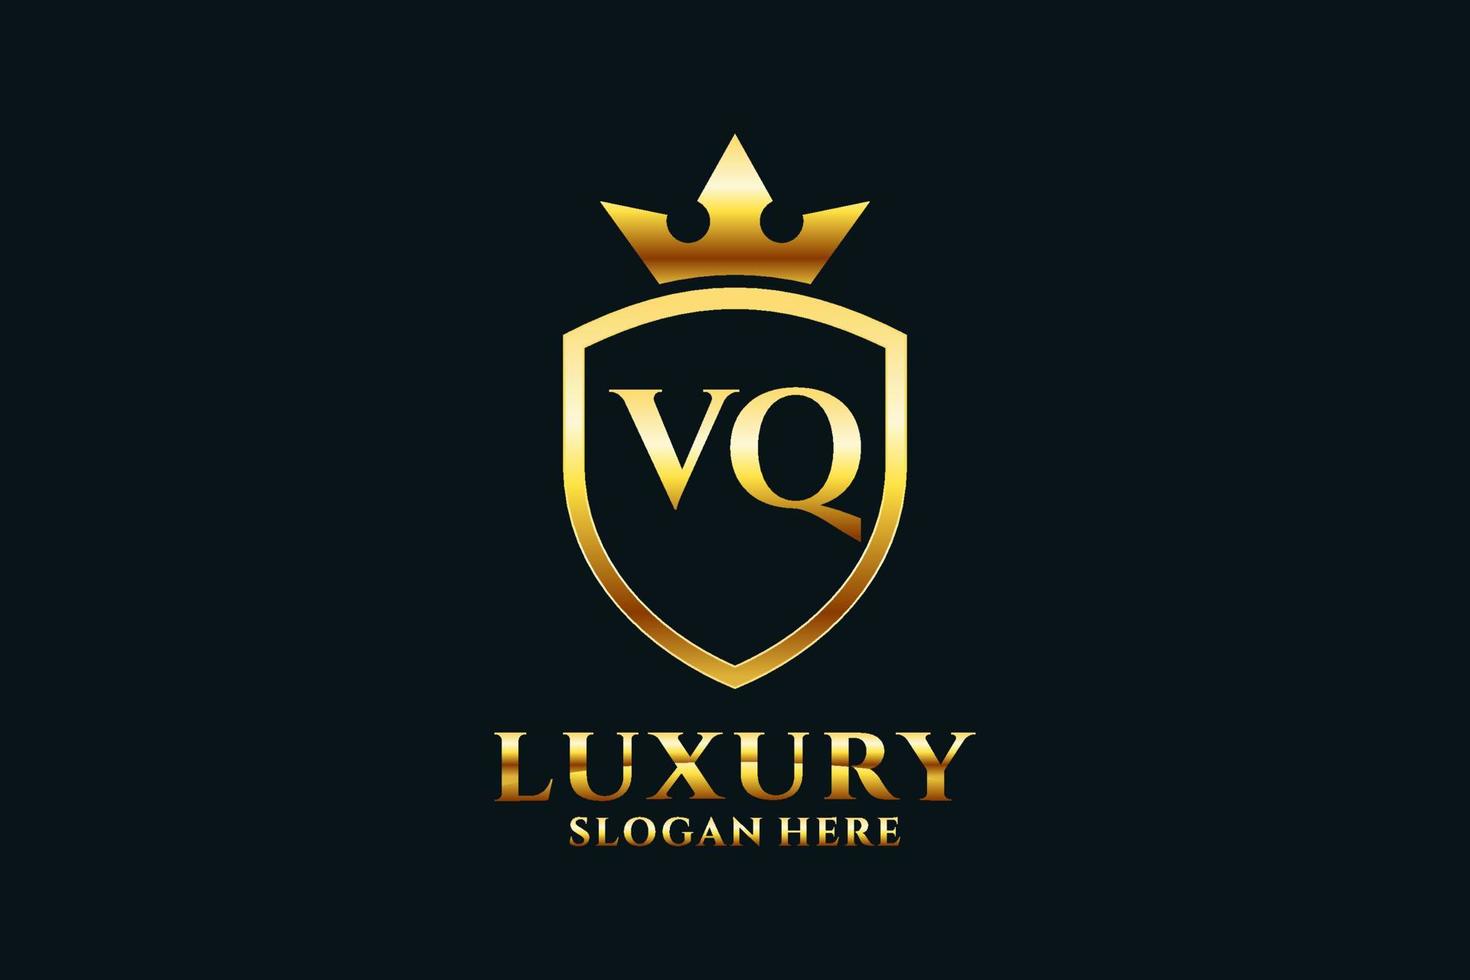 initial VQ elegant luxury monogram logo or badge template with scrolls and royal crown - perfect for luxurious branding projects vector